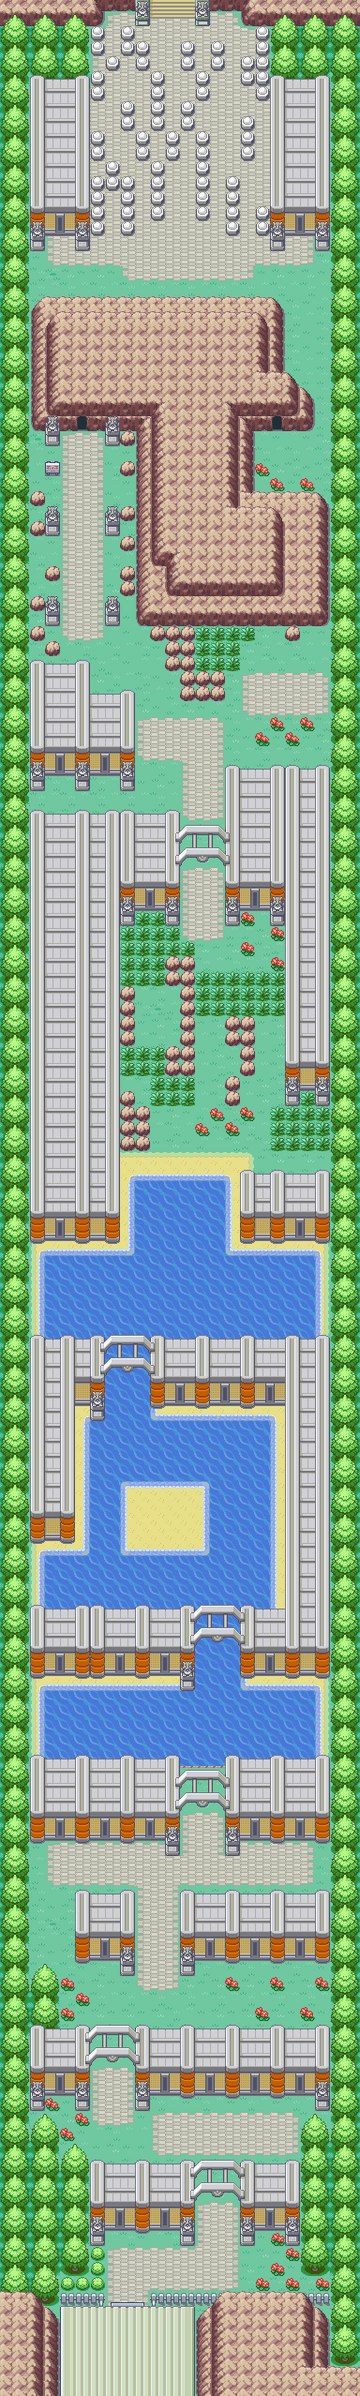 Route 23.